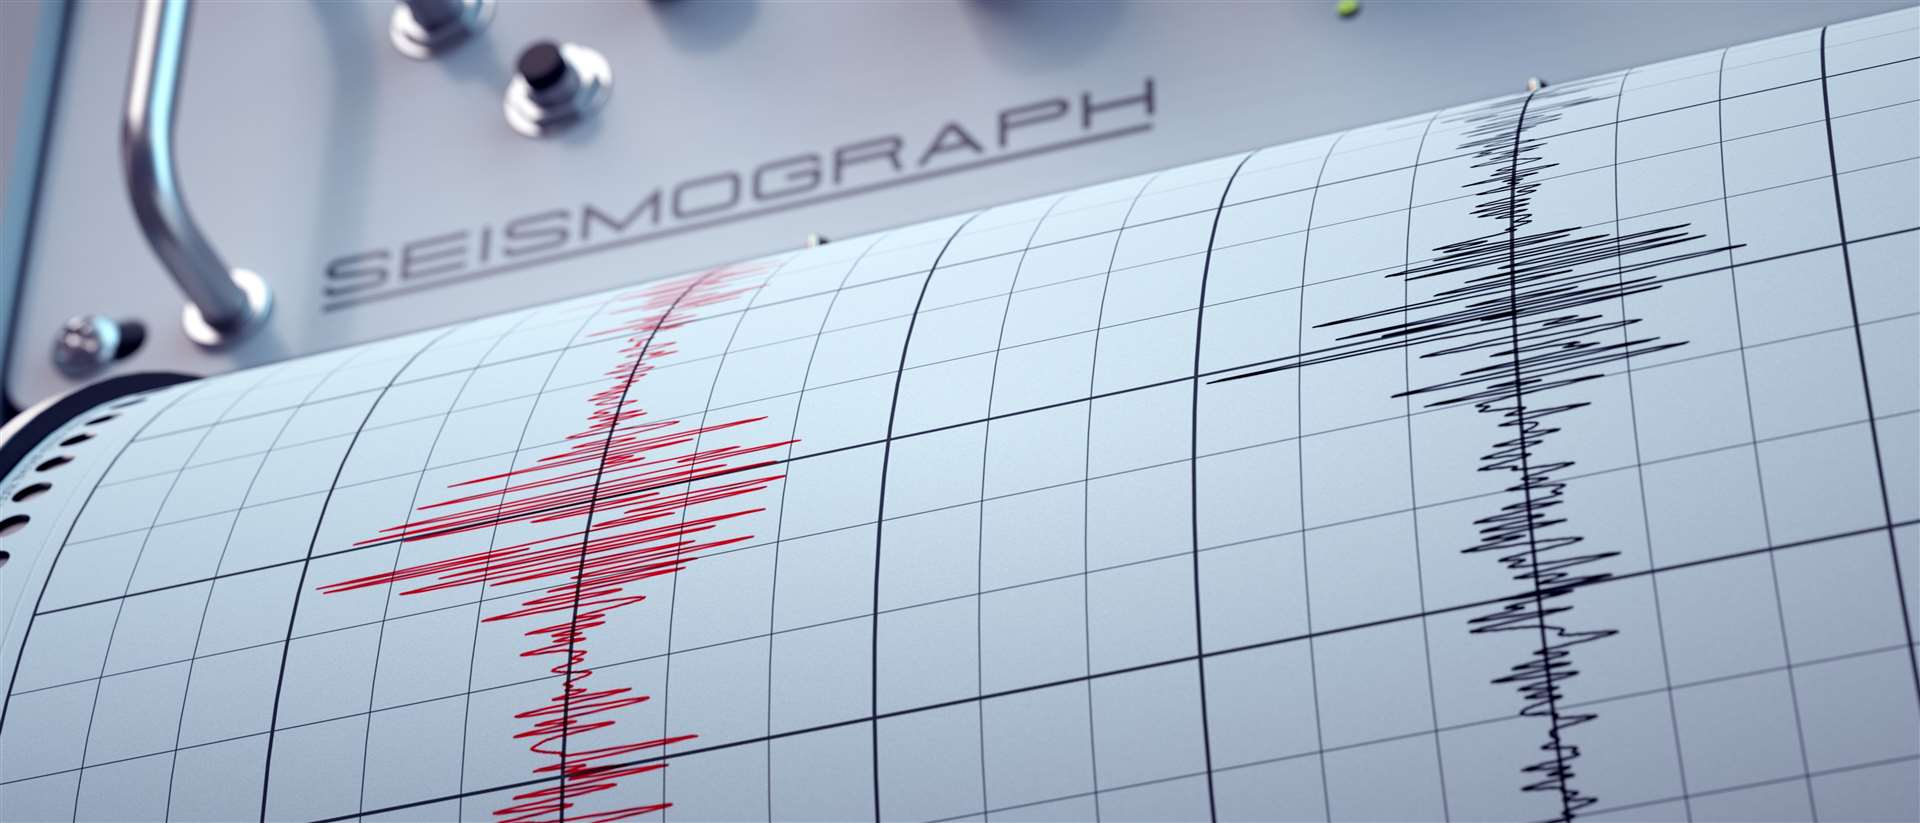 The first tremor measured 2.1 magnitude at Melvich, followed nearly three hours later by a smaller 0.8 magnitude quake.